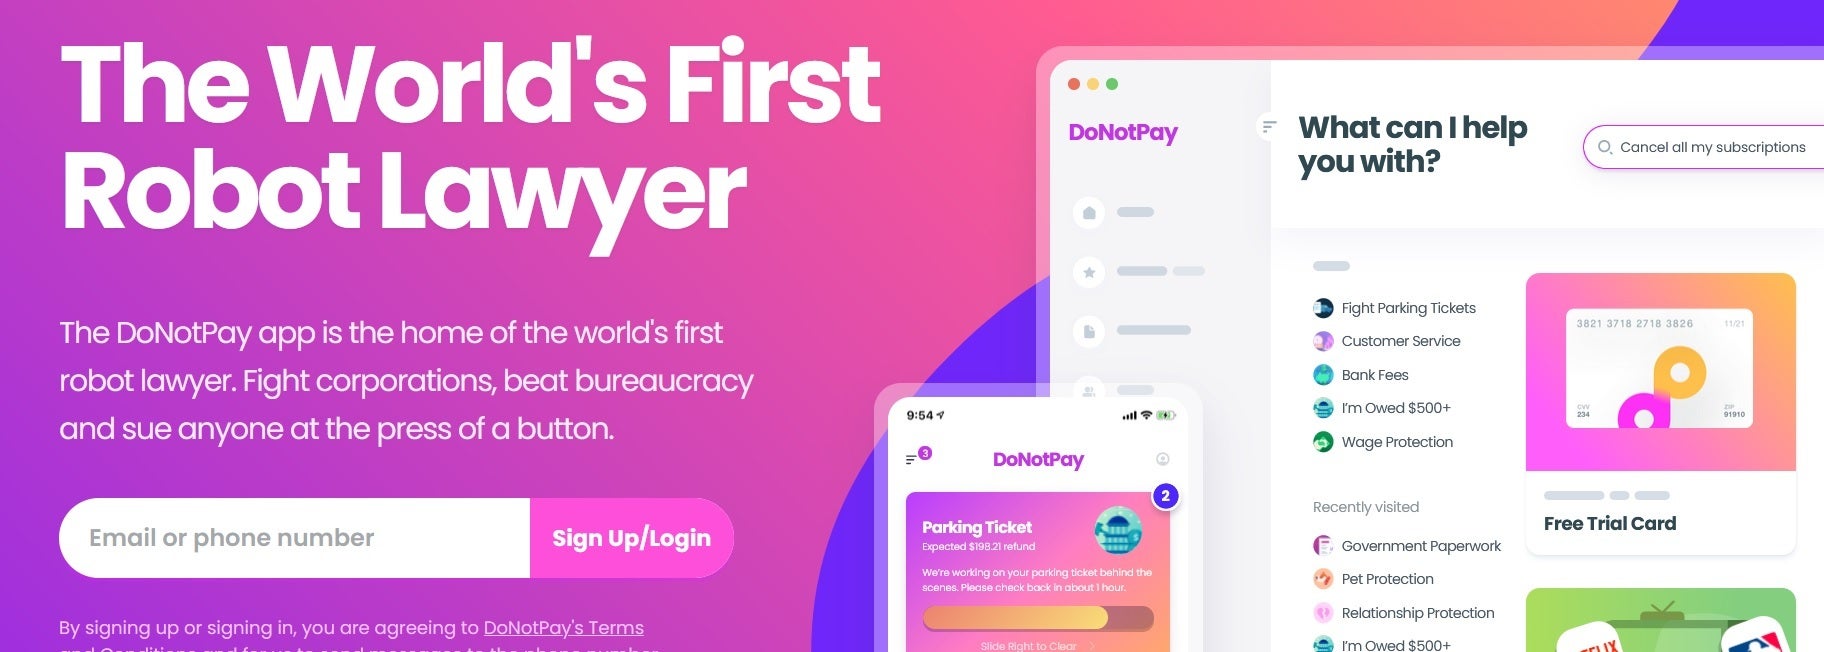 DoNotPay website will help you handle certain tasks: AI-powered smartphone app will help defend a speeding driver in court next month